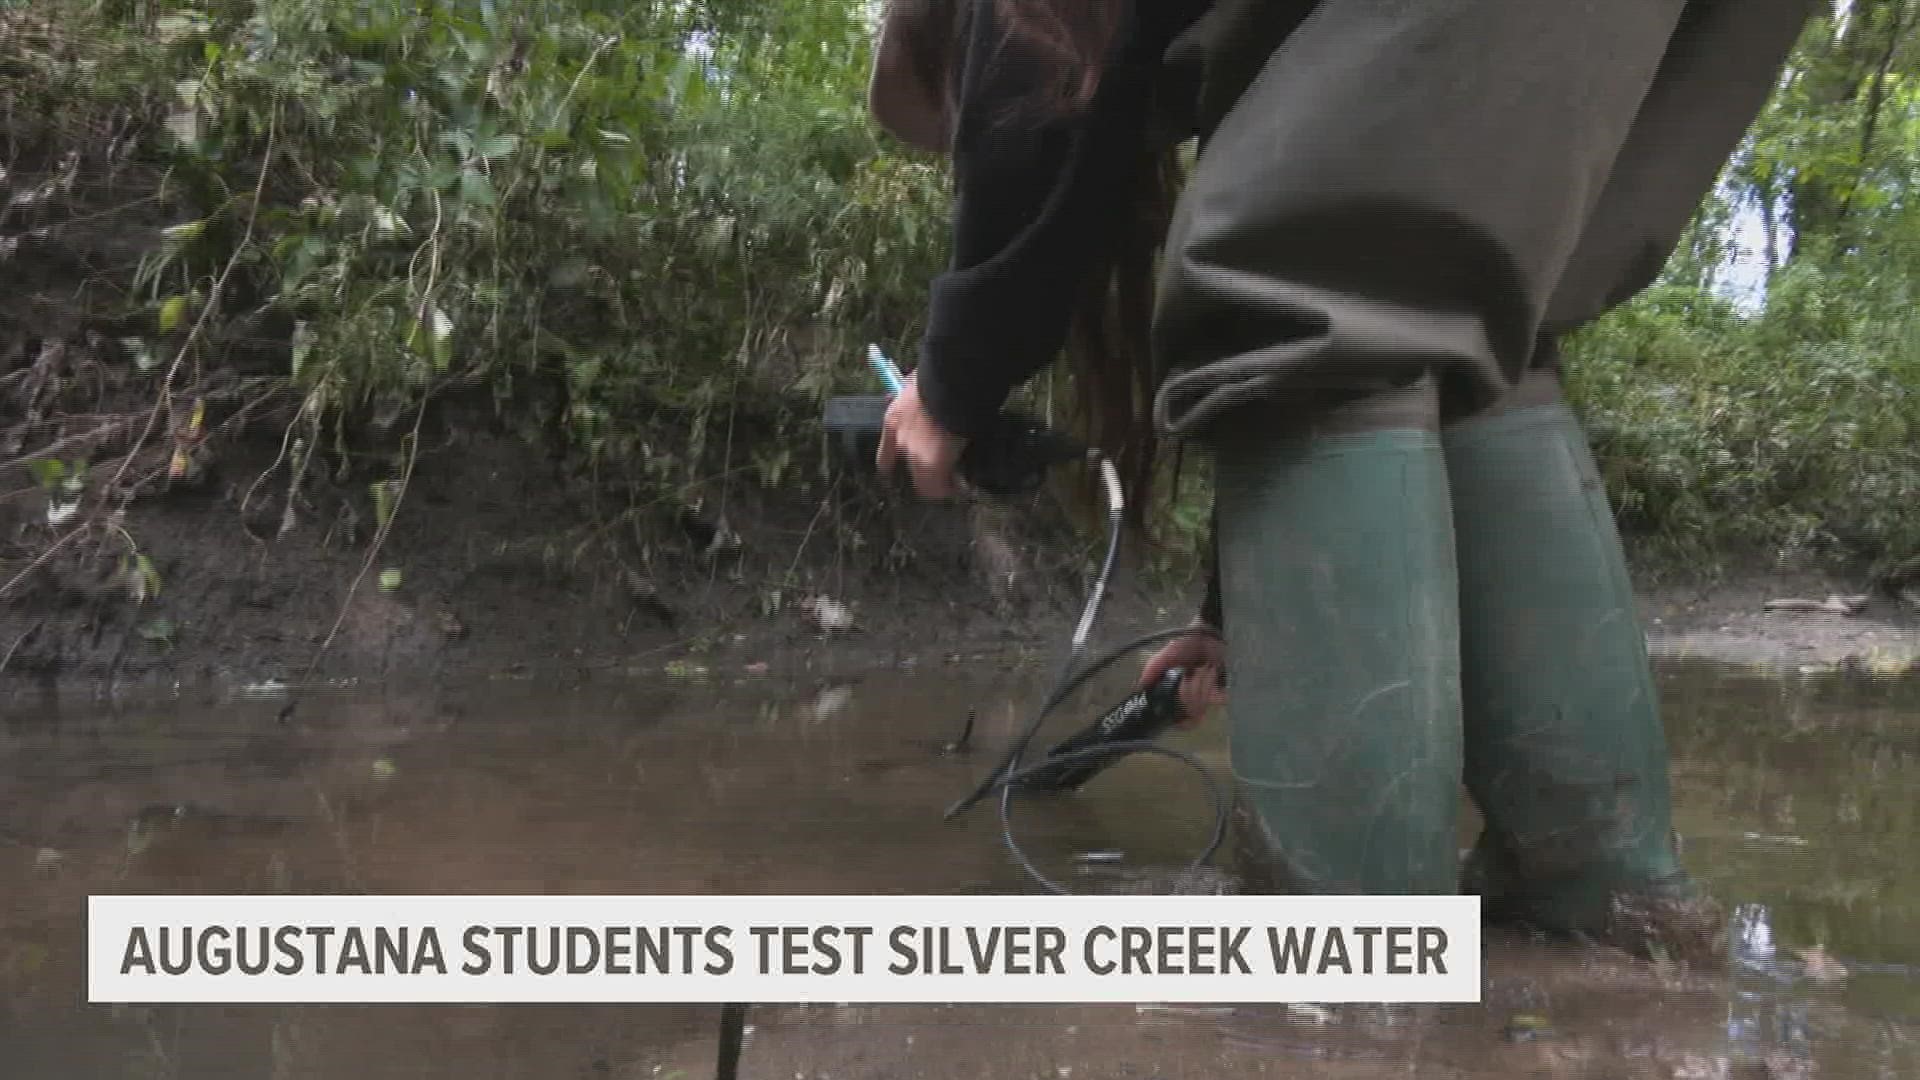 The college partnered with the City of Davenport to give Biology and Environmental Science students a chance to collect and test local water samples.